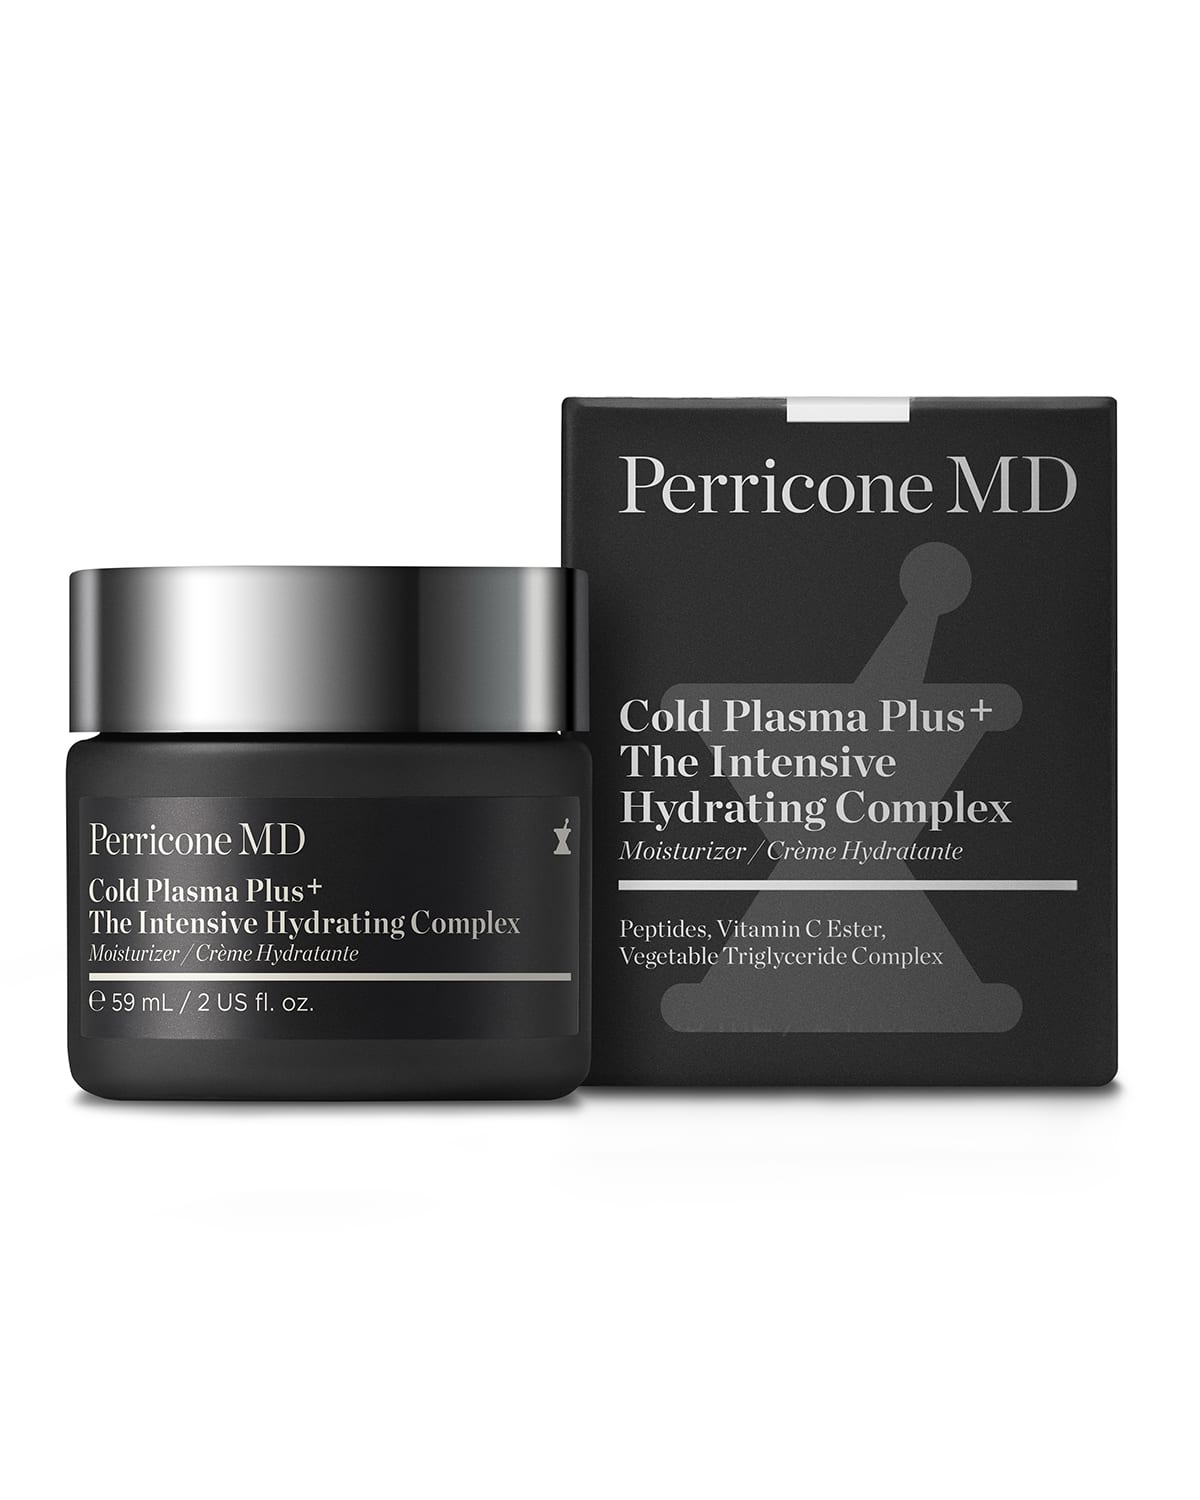 2 oz. Cold Plasma Plus+ The Intensive Hydrating Complex